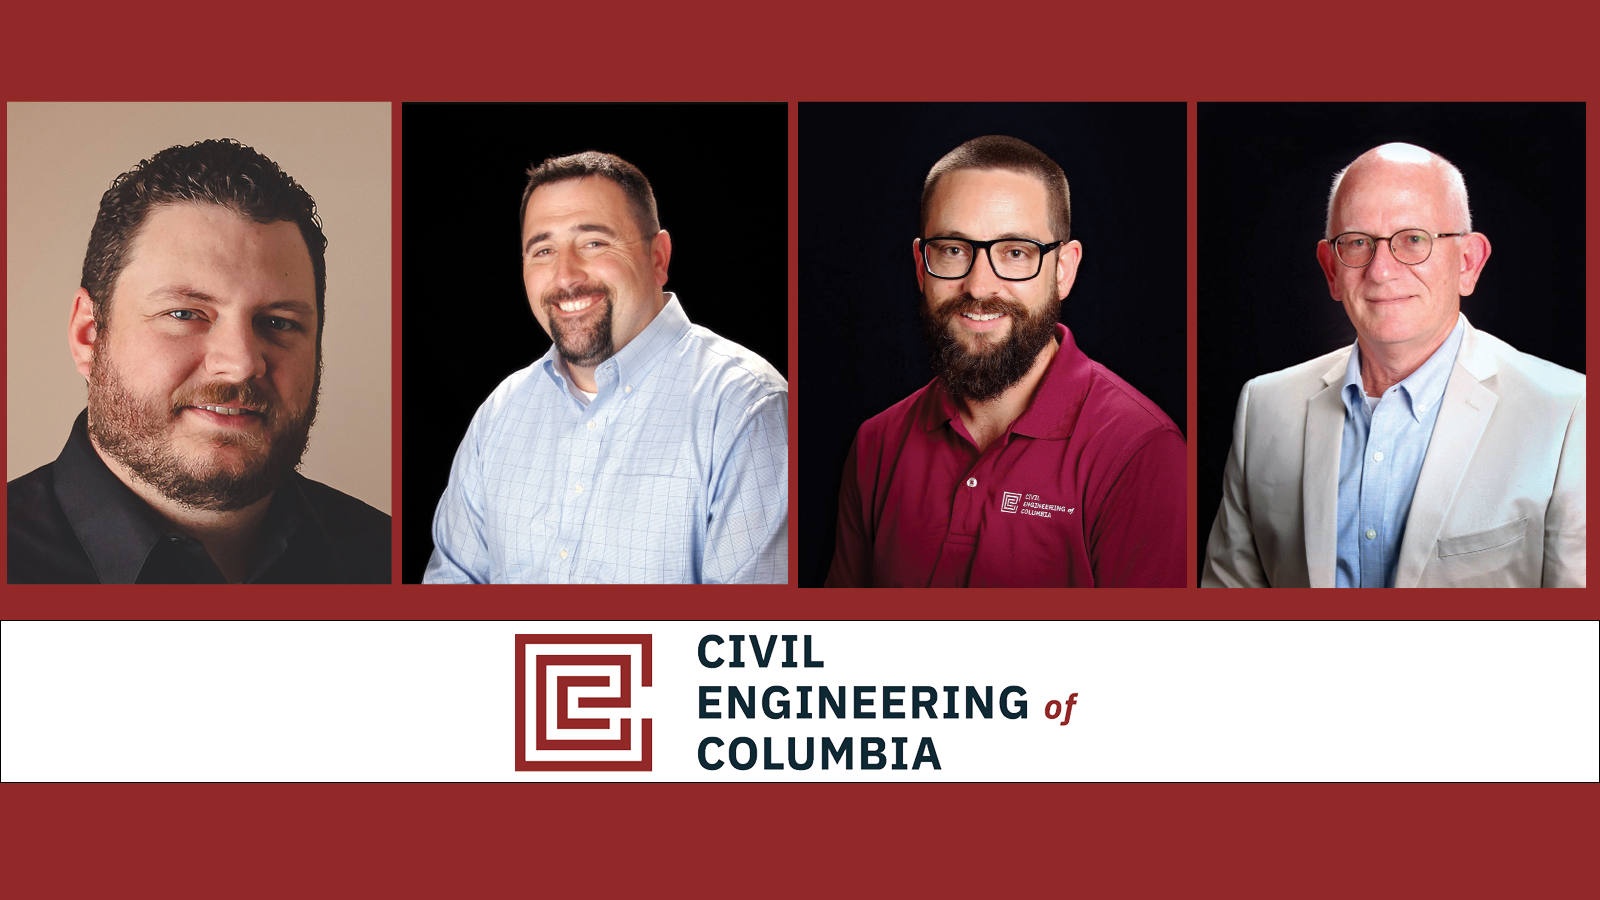 The leadership team at Civil Engineering of Columbia includes (left to right) Allen Goff, Josh Rabon, Clay Walsh and Bill Flowers. (Photo/Provided)